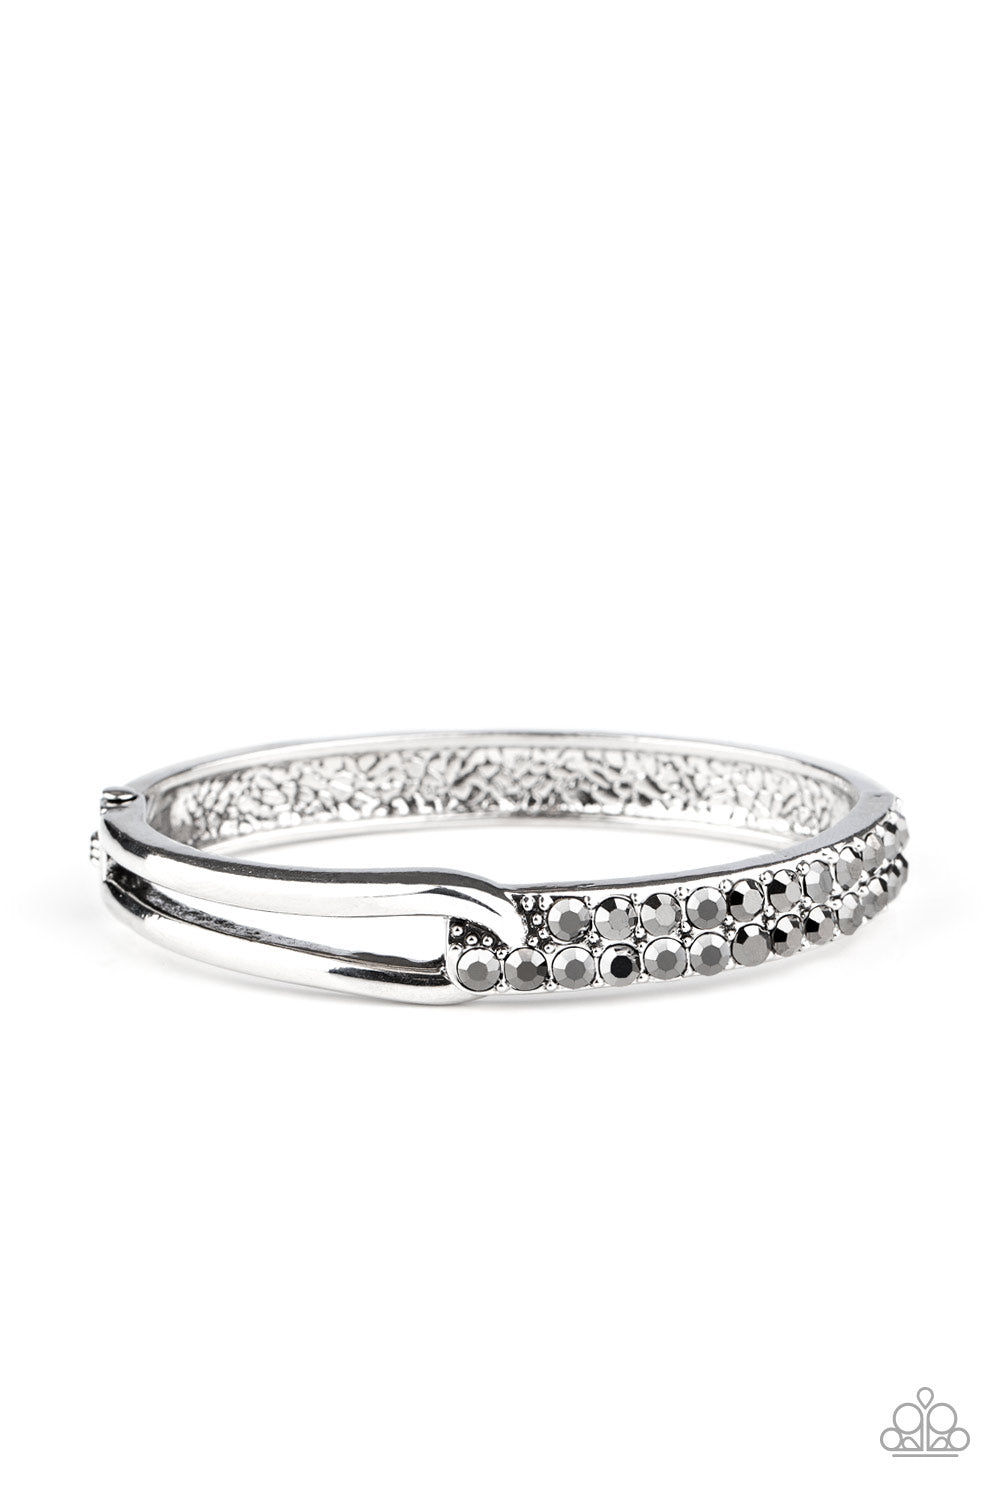 &lt;P&gt;An airy silver fitting links with a silver band encrusted in two rows of glittery hematite rhinestones across the wrist, creating an edgy bangle-like cuff. Features a hinged closure.
 &lt;/P&gt;

&lt;P&gt;&lt;I&gt; Sold as one individual bracelet.&lt;/I&gt;&lt;/p&gt;


&lt;img src=\&quot;https://d9b54x484lq62.cloudfront.net/paparazzi/shopping/images/517_tag150x115_1.png\&quot; alt=\&quot;New Kit\&quot; align=\&quot;middle\&quot; height=\&quot;50\&quot; width=\&quot;50\&quot;/&gt;